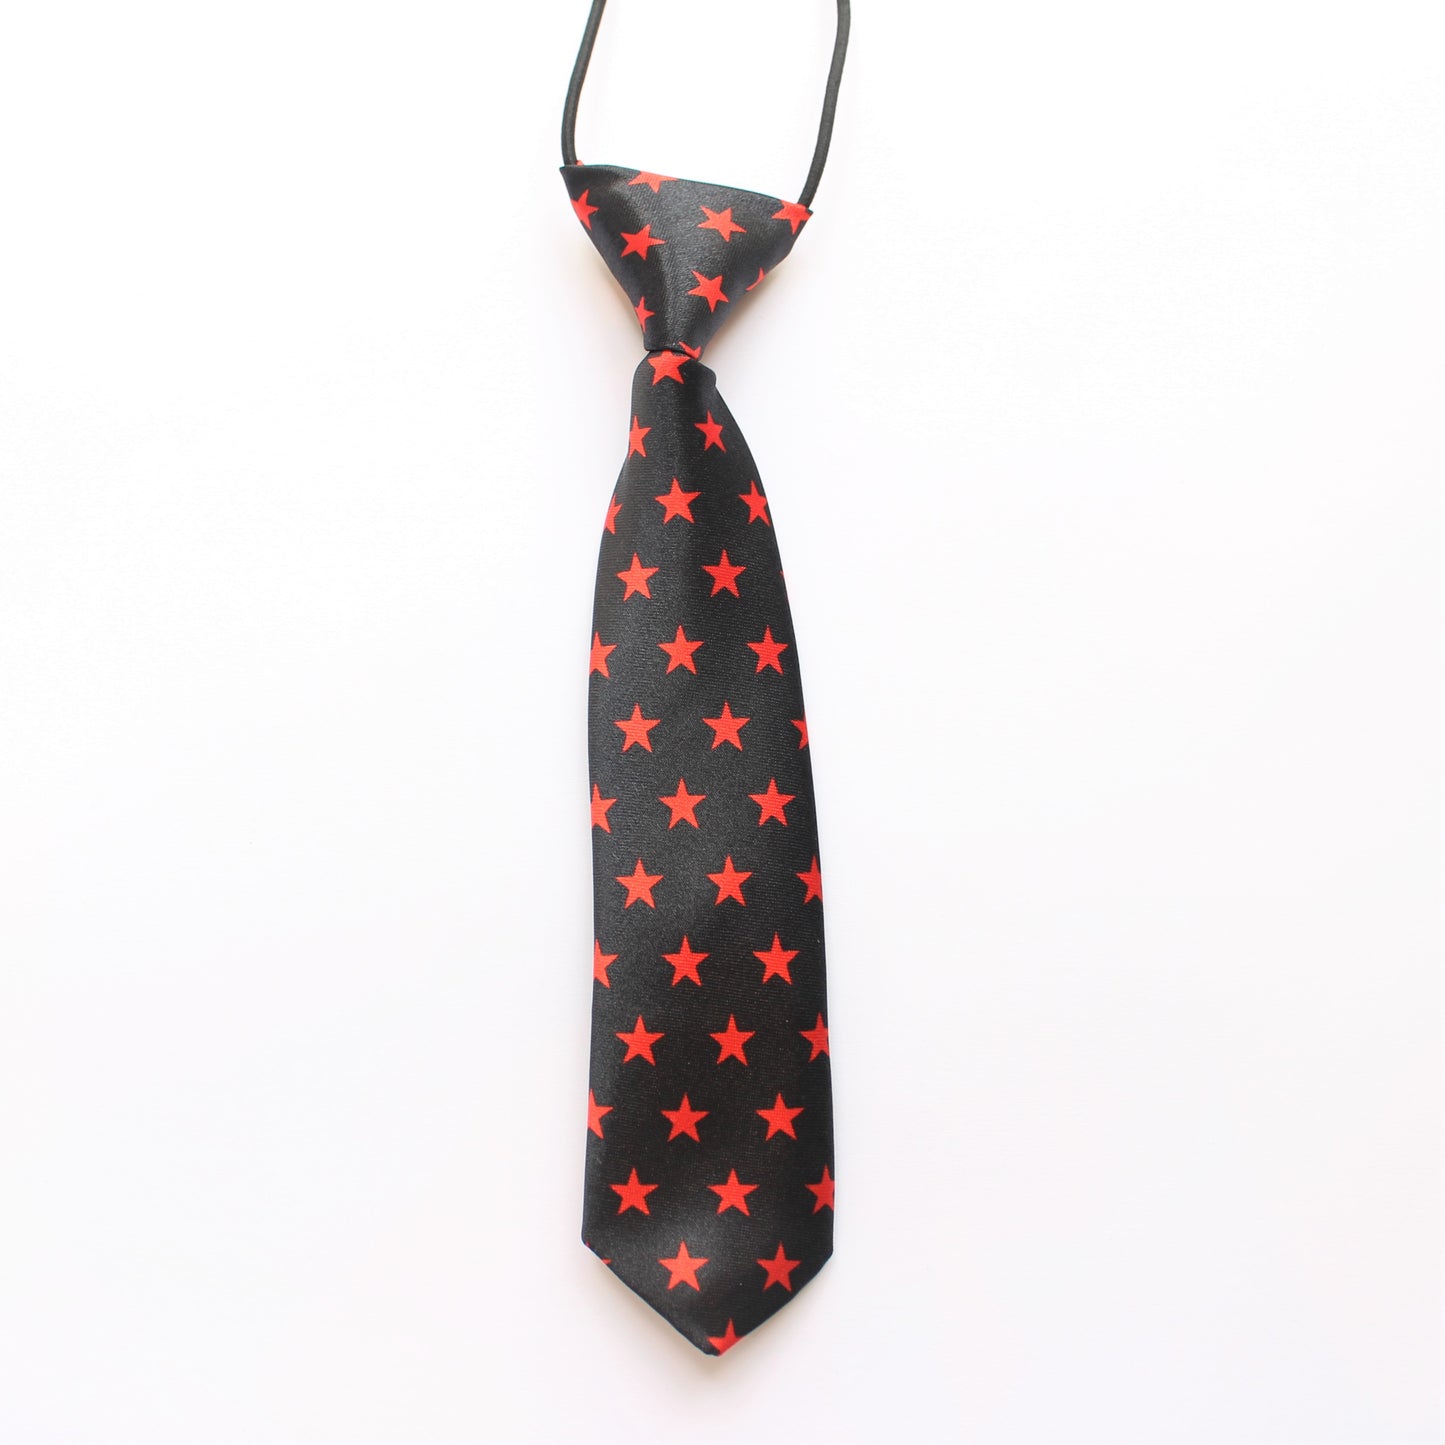 Patterned Baby Ties